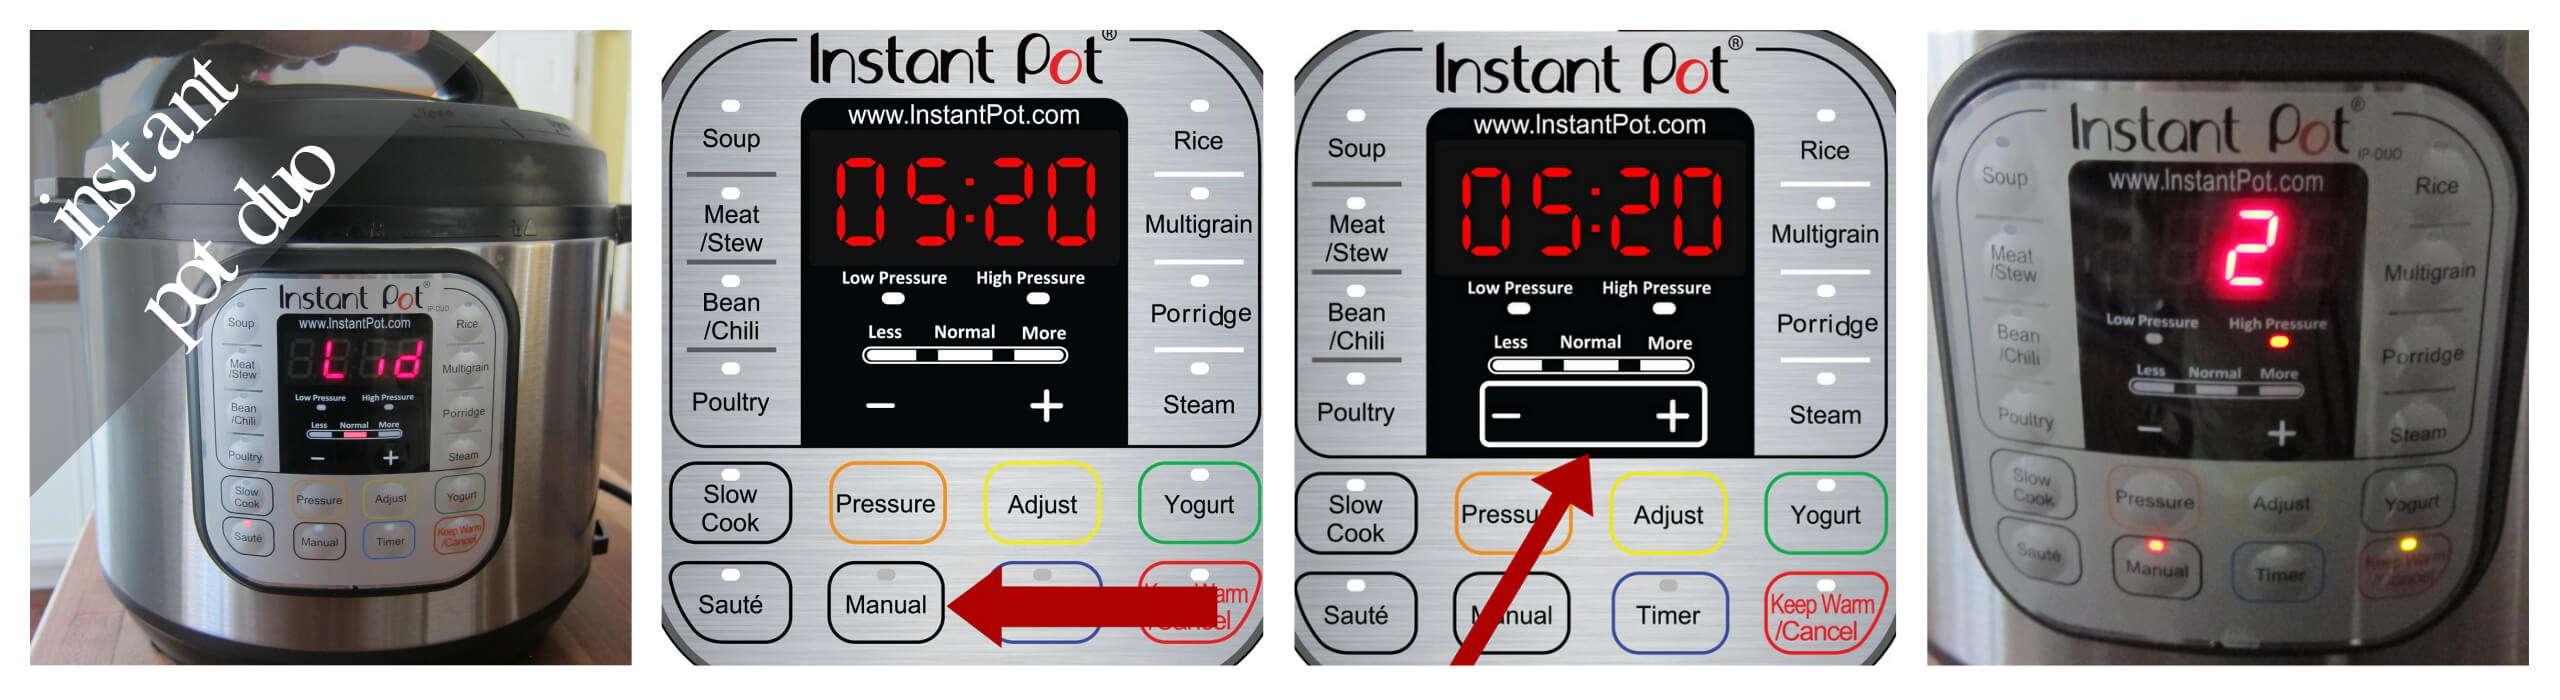 Instant Pot Duo Manual mode 2 minutes collage - close lid, press manual, press + -, display says 2 - Paint the Kitchen Red